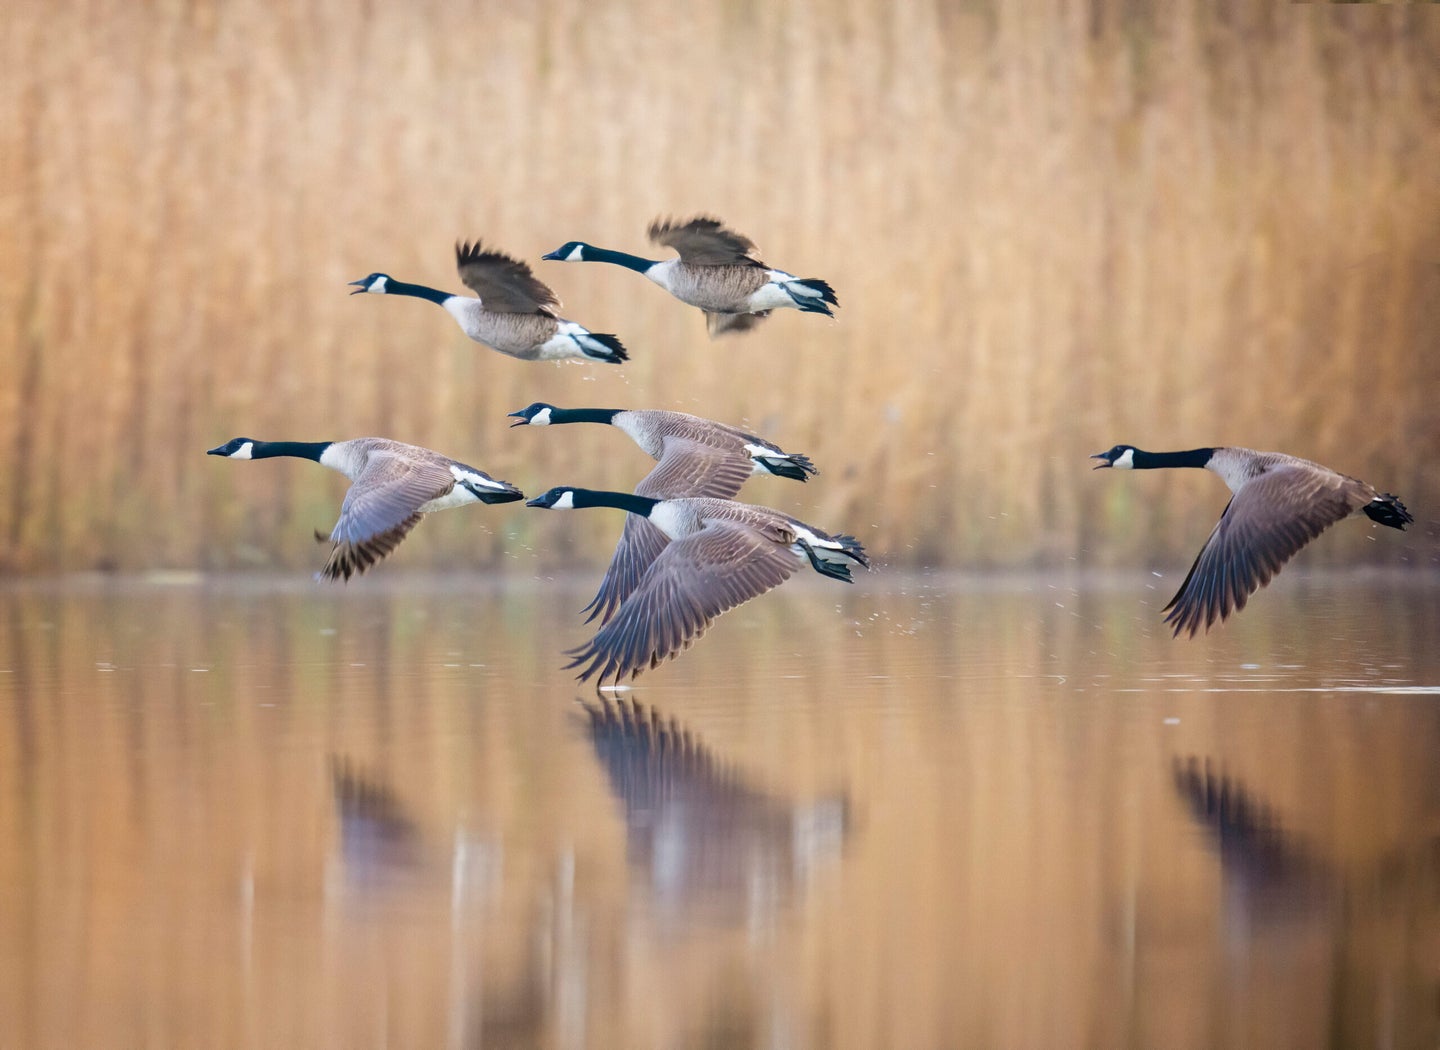 A small flock of geese in motion against soft gold colored reeds and water